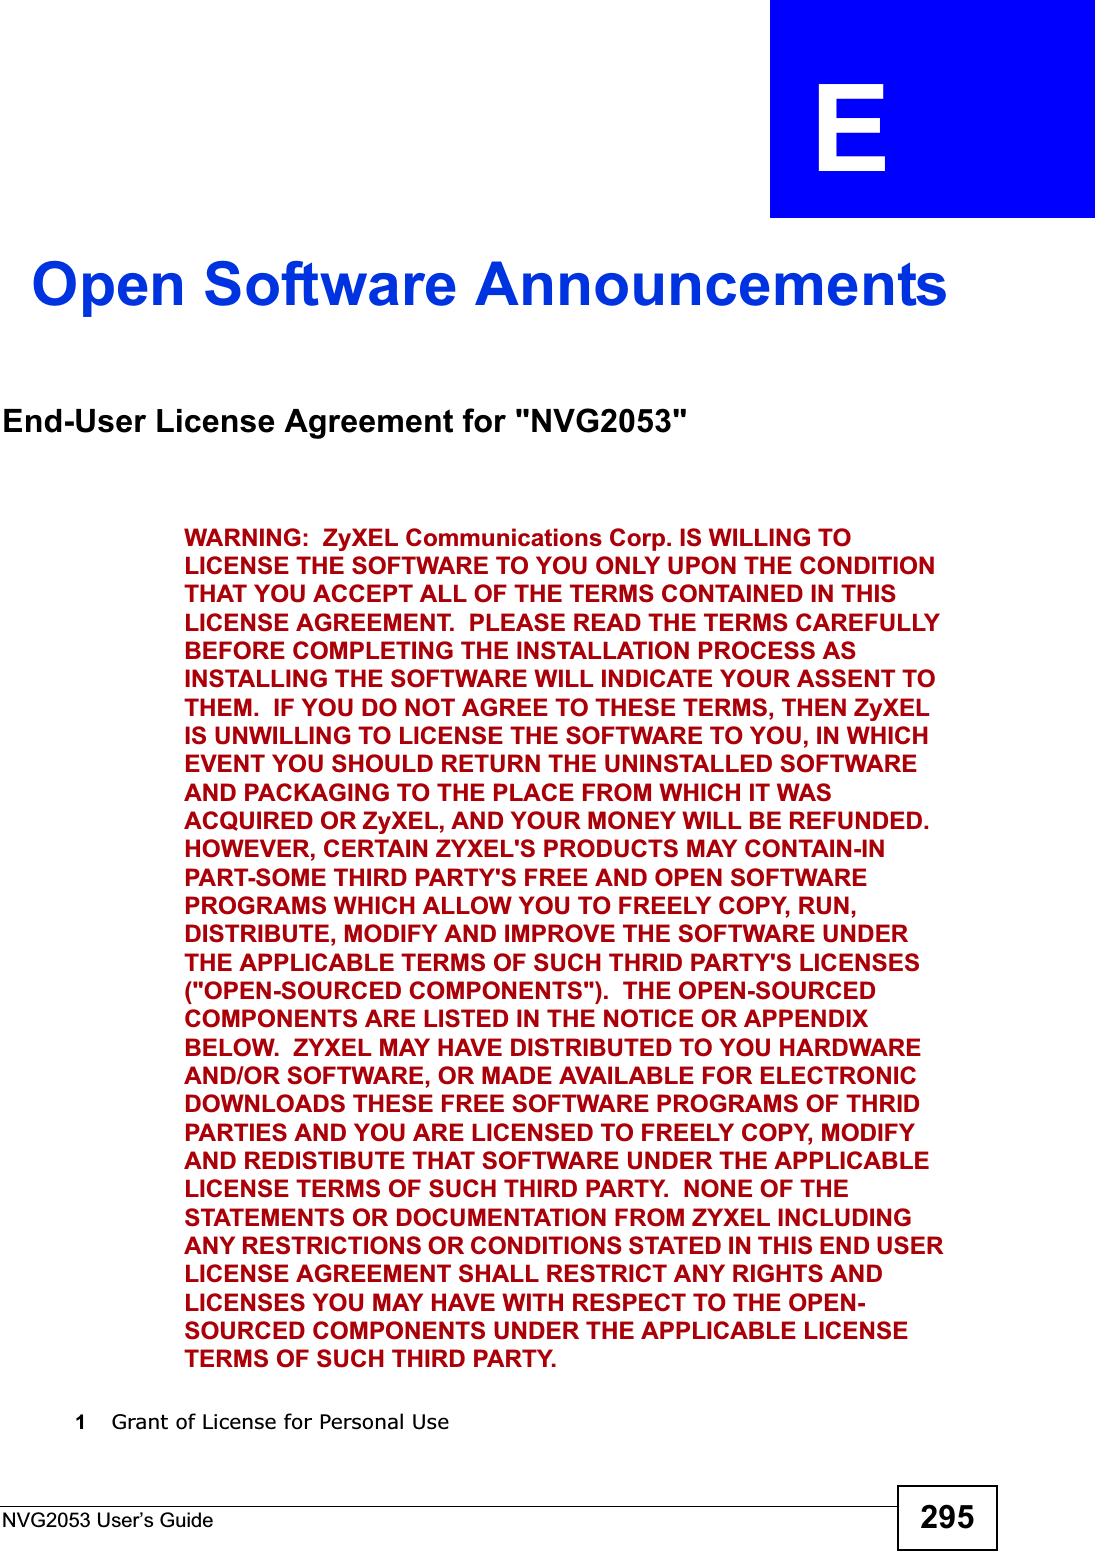 NVG2053 User’s Guide 295APPENDIX  E Open Software AnnouncementsEnd-User License Agreement for &quot;NVG2053&quot;WARNING:  ZyXEL Communications Corp. IS WILLING TO LICENSE THE SOFTWARE TO YOU ONLY UPON THE CONDITION THAT YOU ACCEPT ALL OF THE TERMS CONTAINED IN THIS LICENSE AGREEMENT.  PLEASE READ THE TERMS CAREFULLY BEFORE COMPLETING THE INSTALLATION PROCESS AS INSTALLING THE SOFTWARE WILL INDICATE YOUR ASSENT TO THEM.  IF YOU DO NOT AGREE TO THESE TERMS, THEN ZyXEL IS UNWILLING TO LICENSE THE SOFTWARE TO YOU, IN WHICH EVENT YOU SHOULD RETURN THE UNINSTALLED SOFTWARE AND PACKAGING TO THE PLACE FROM WHICH IT WAS ACQUIRED OR ZyXEL, AND YOUR MONEY WILL BE REFUNDED.   HOWEVER, CERTAIN ZYXEL&apos;S PRODUCTS MAY CONTAIN-IN PART-SOME THIRD PARTY&apos;S FREE AND OPEN SOFTWARE PROGRAMS WHICH ALLOW YOU TO FREELY COPY, RUN, DISTRIBUTE, MODIFY AND IMPROVE THE SOFTWARE UNDER THE APPLICABLE TERMS OF SUCH THRID PARTY&apos;S LICENSES (&quot;OPEN-SOURCED COMPONENTS&quot;).  THE OPEN-SOURCED COMPONENTS ARE LISTED IN THE NOTICE OR APPENDIX BELOW.  ZYXEL MAY HAVE DISTRIBUTED TO YOU HARDWARE AND/OR SOFTWARE, OR MADE AVAILABLE FOR ELECTRONIC DOWNLOADS THESE FREE SOFTWARE PROGRAMS OF THRID PARTIES AND YOU ARE LICENSED TO FREELY COPY, MODIFY AND REDISTIBUTE THAT SOFTWARE UNDER THE APPLICABLE LICENSE TERMS OF SUCH THIRD PARTY.  NONE OF THE STATEMENTS OR DOCUMENTATION FROM ZYXEL INCLUDING ANY RESTRICTIONS OR CONDITIONS STATED IN THIS END USER LICENSE AGREEMENT SHALL RESTRICT ANY RIGHTS AND LICENSES YOU MAY HAVE WITH RESPECT TO THE OPEN-SOURCED COMPONENTS UNDER THE APPLICABLE LICENSE TERMS OF SUCH THIRD PARTY.1Grant of License for Personal Use